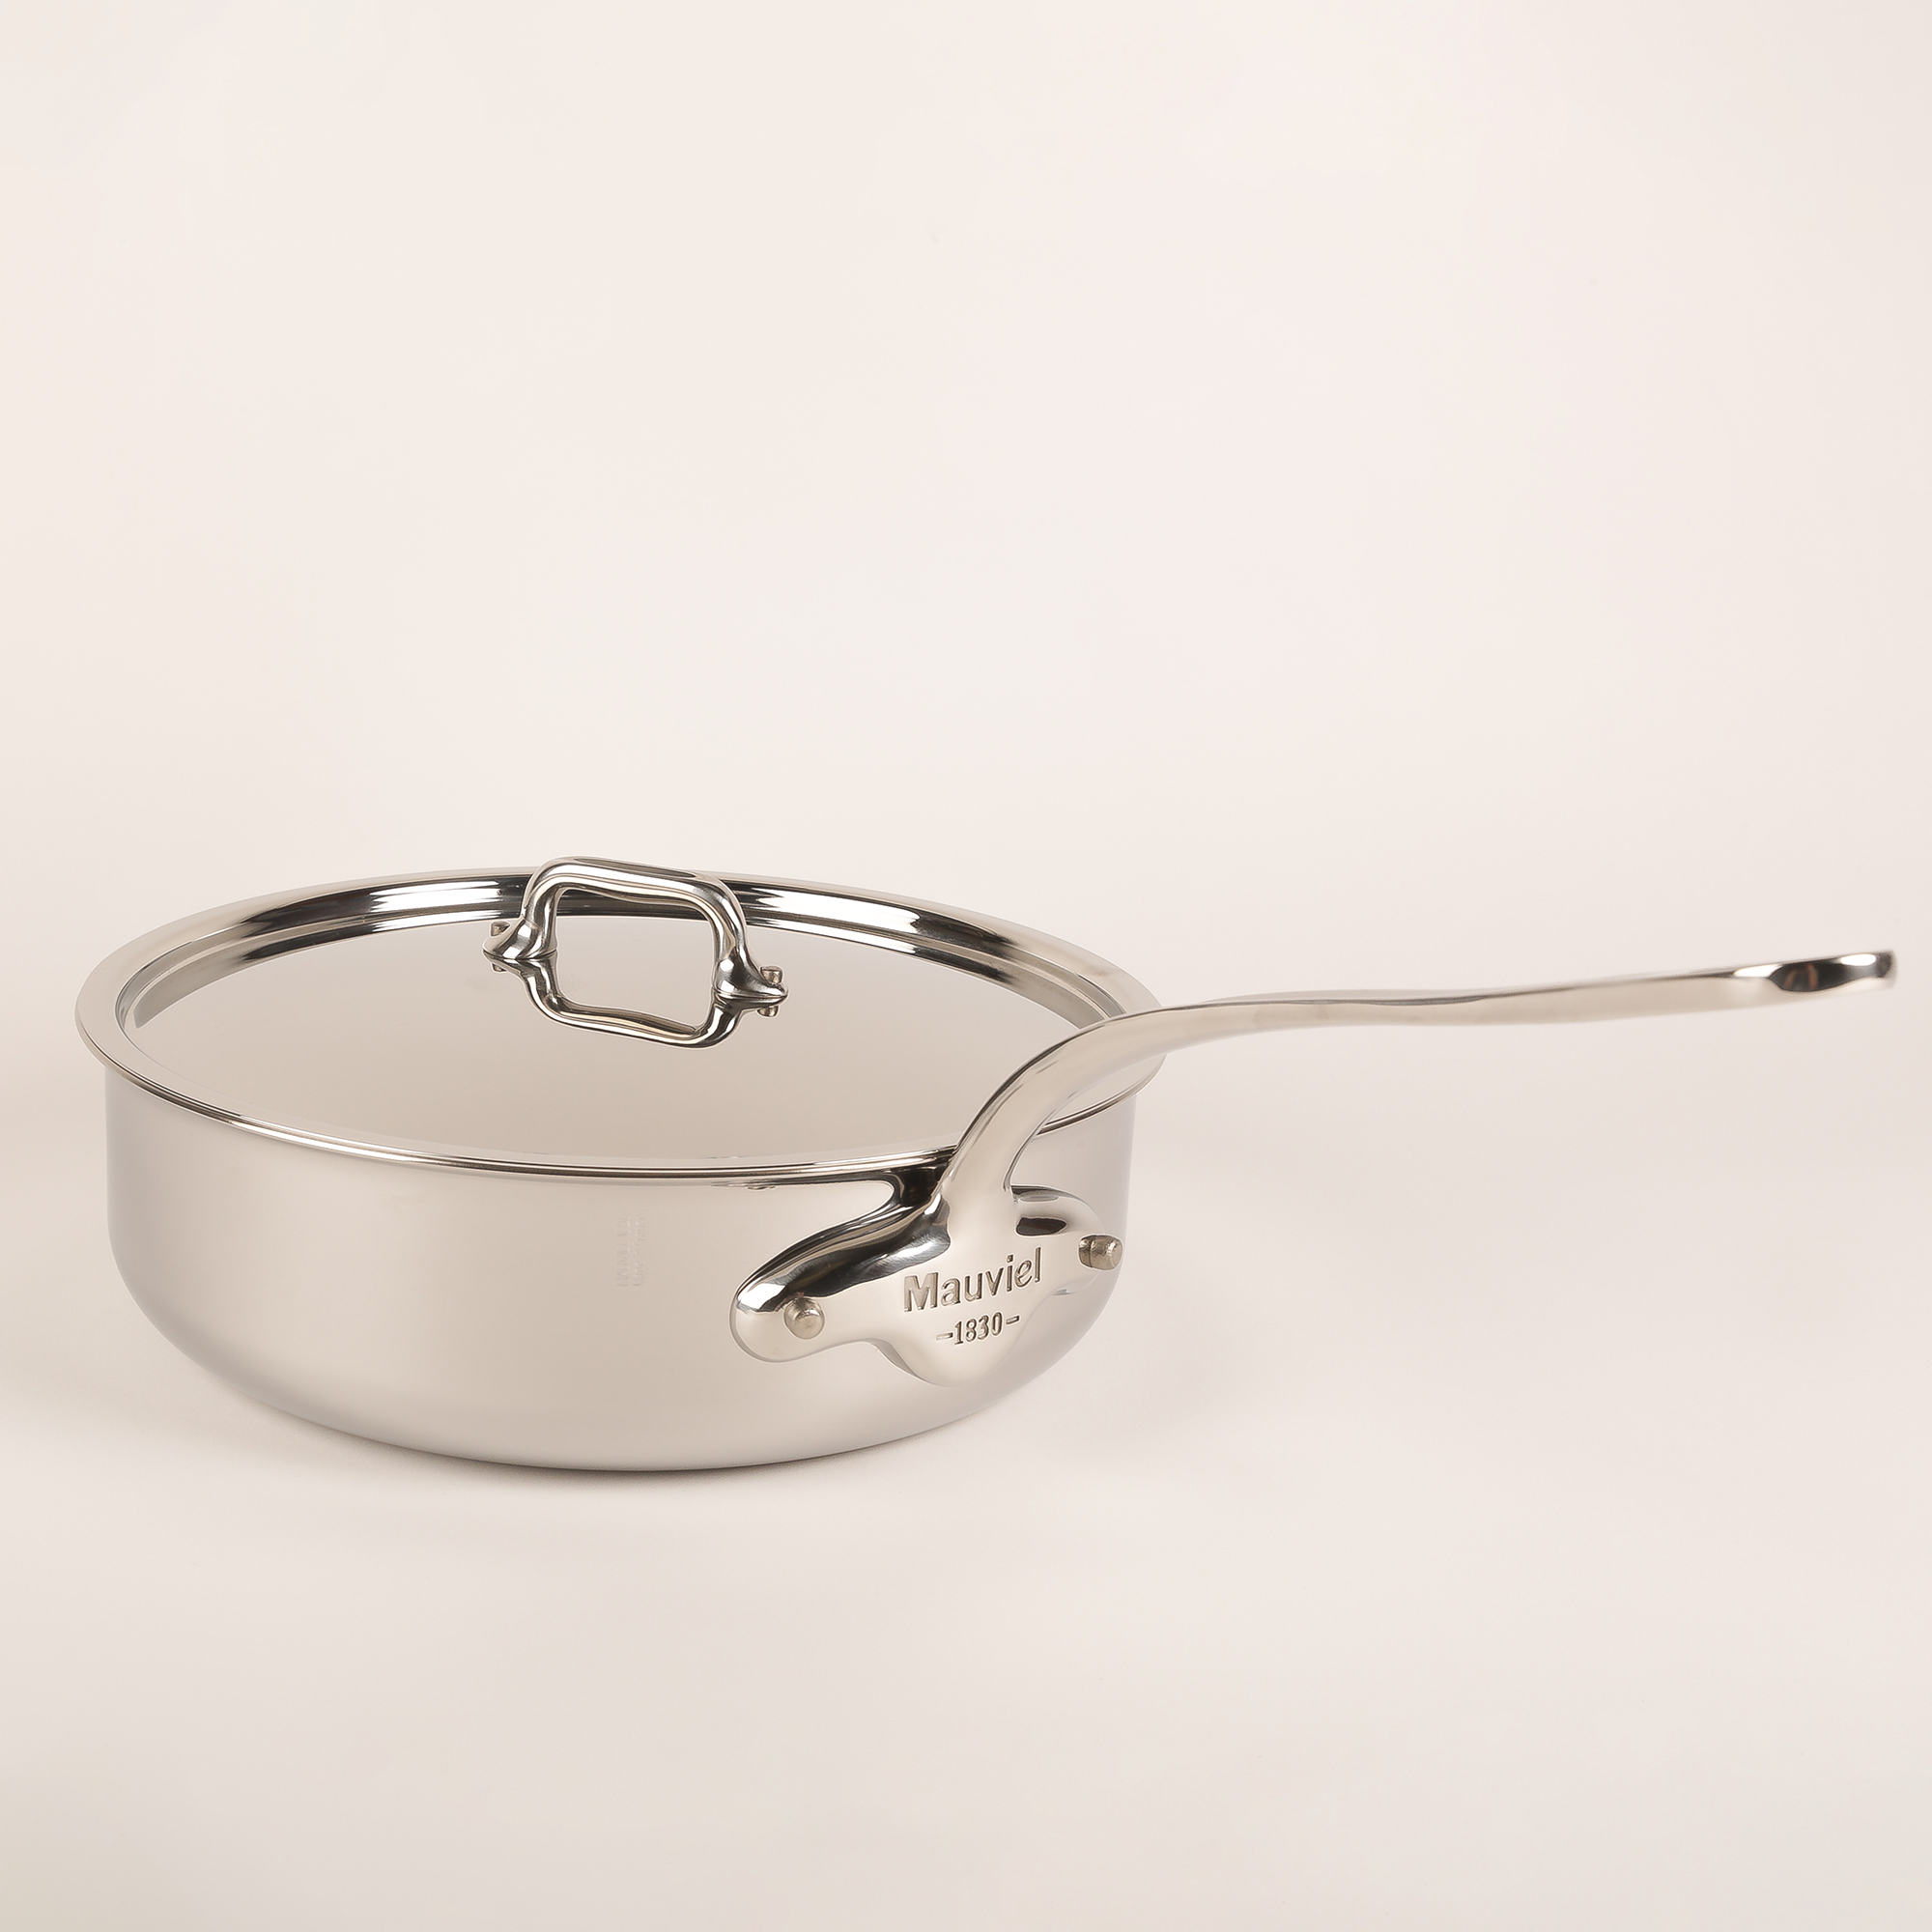 Mauviel M'URBAN 4 Tri-Ply Saute Pan With Lid, Cast Stainless Steel Handle, 3.2-Qt - Mauviel USA